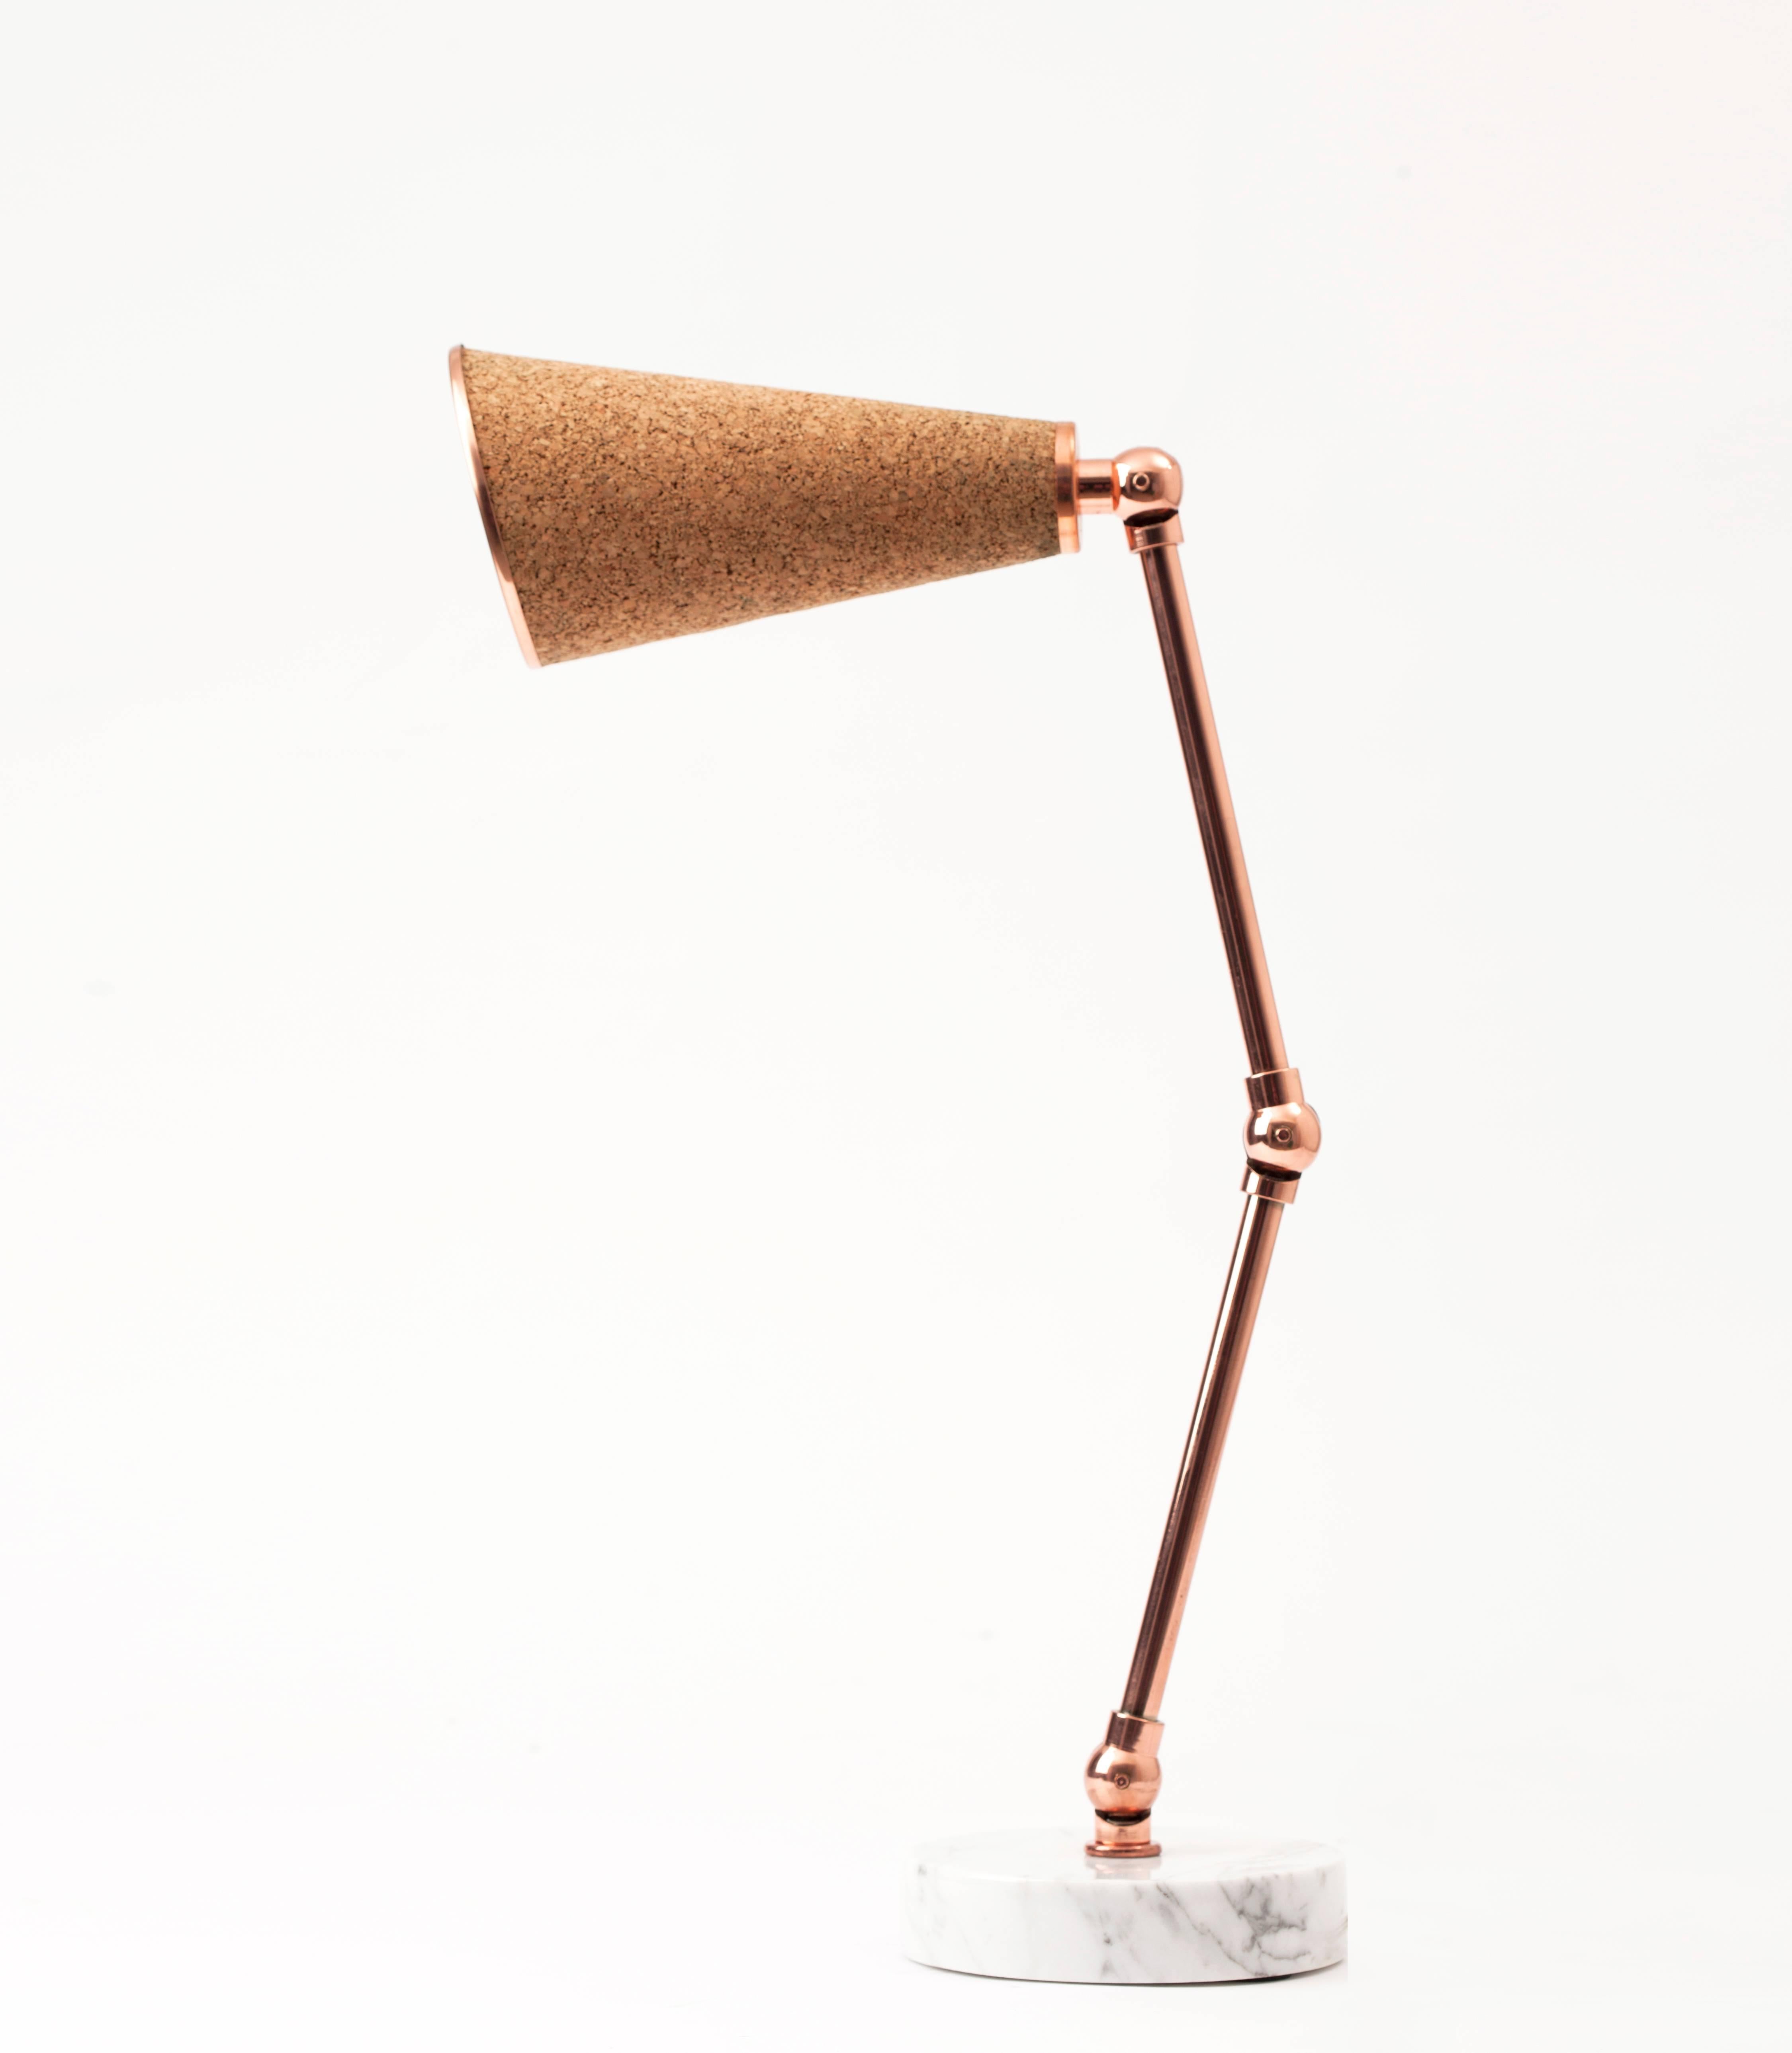 Lanterna is a new age robot lamp with a heart. Unique textured materials such as felt, cork and cowhide are combined with white and black colored marbles and shiny metals such as brass and copper. Adjustable arms of Lanterna enables users to justify